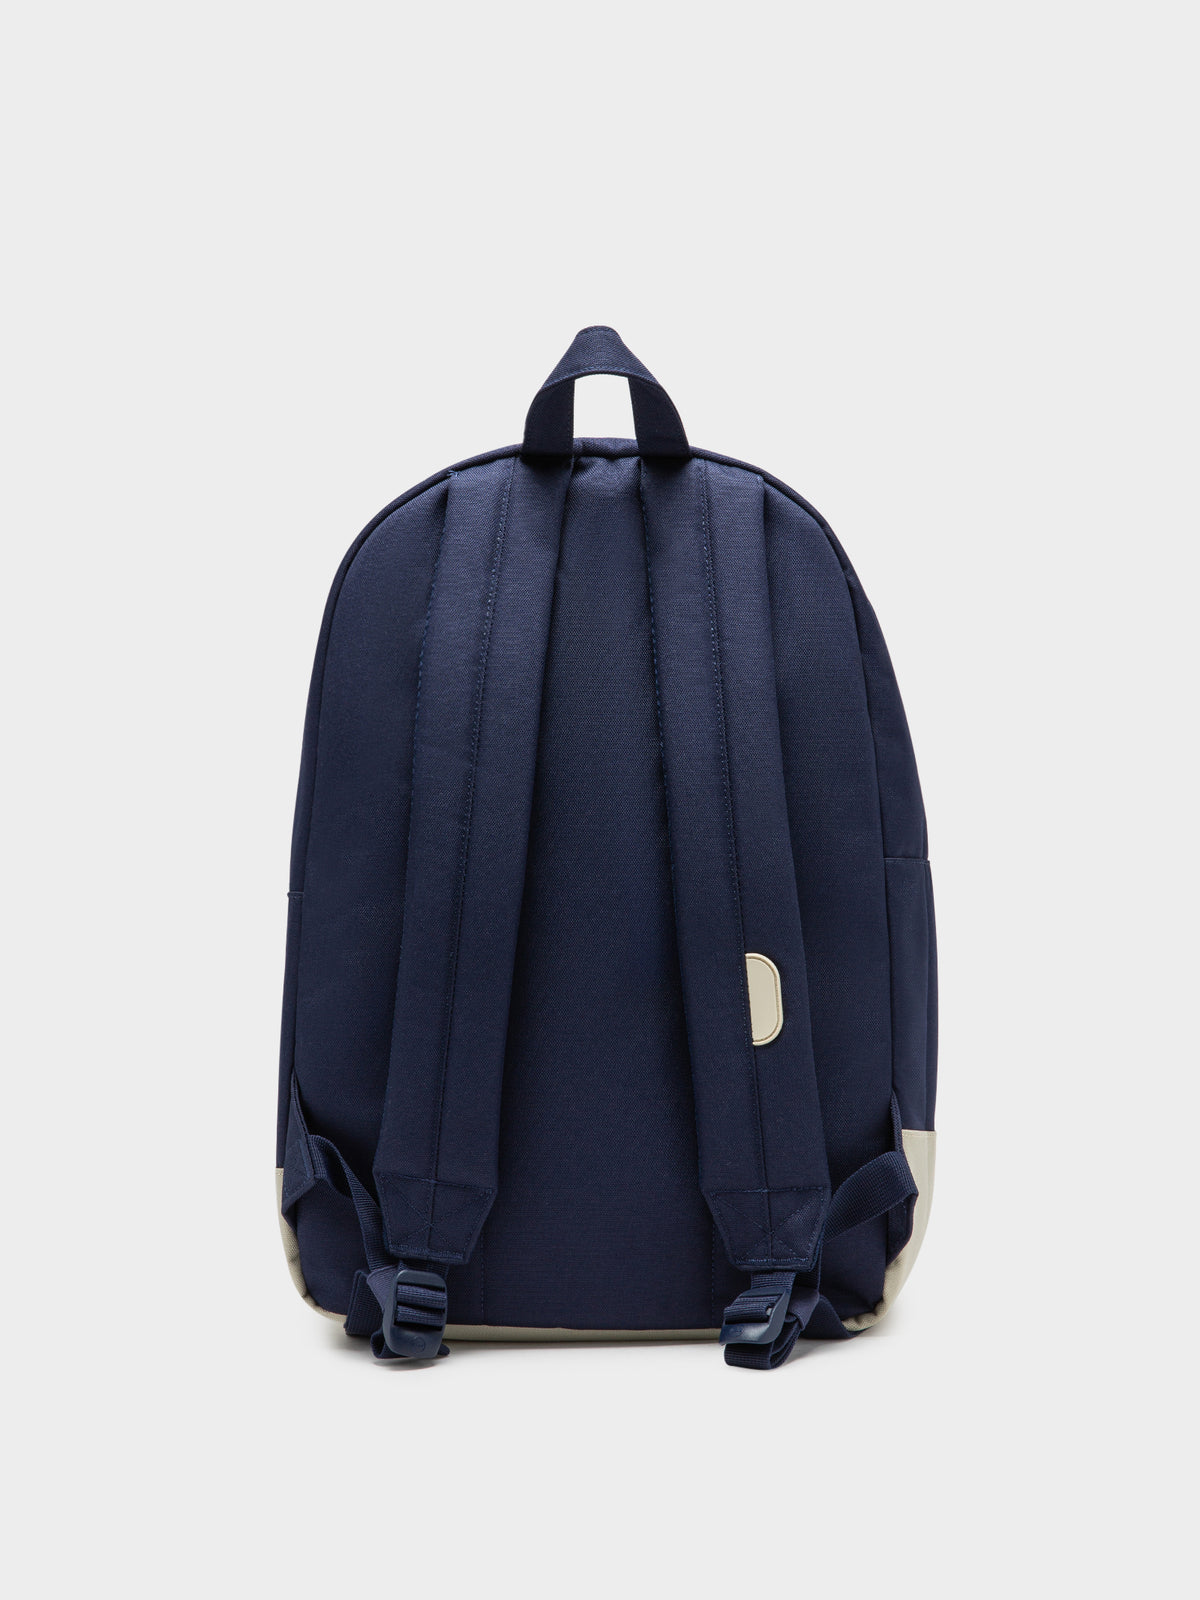 Heritage Backpack in Peacoat Navy &amp; White